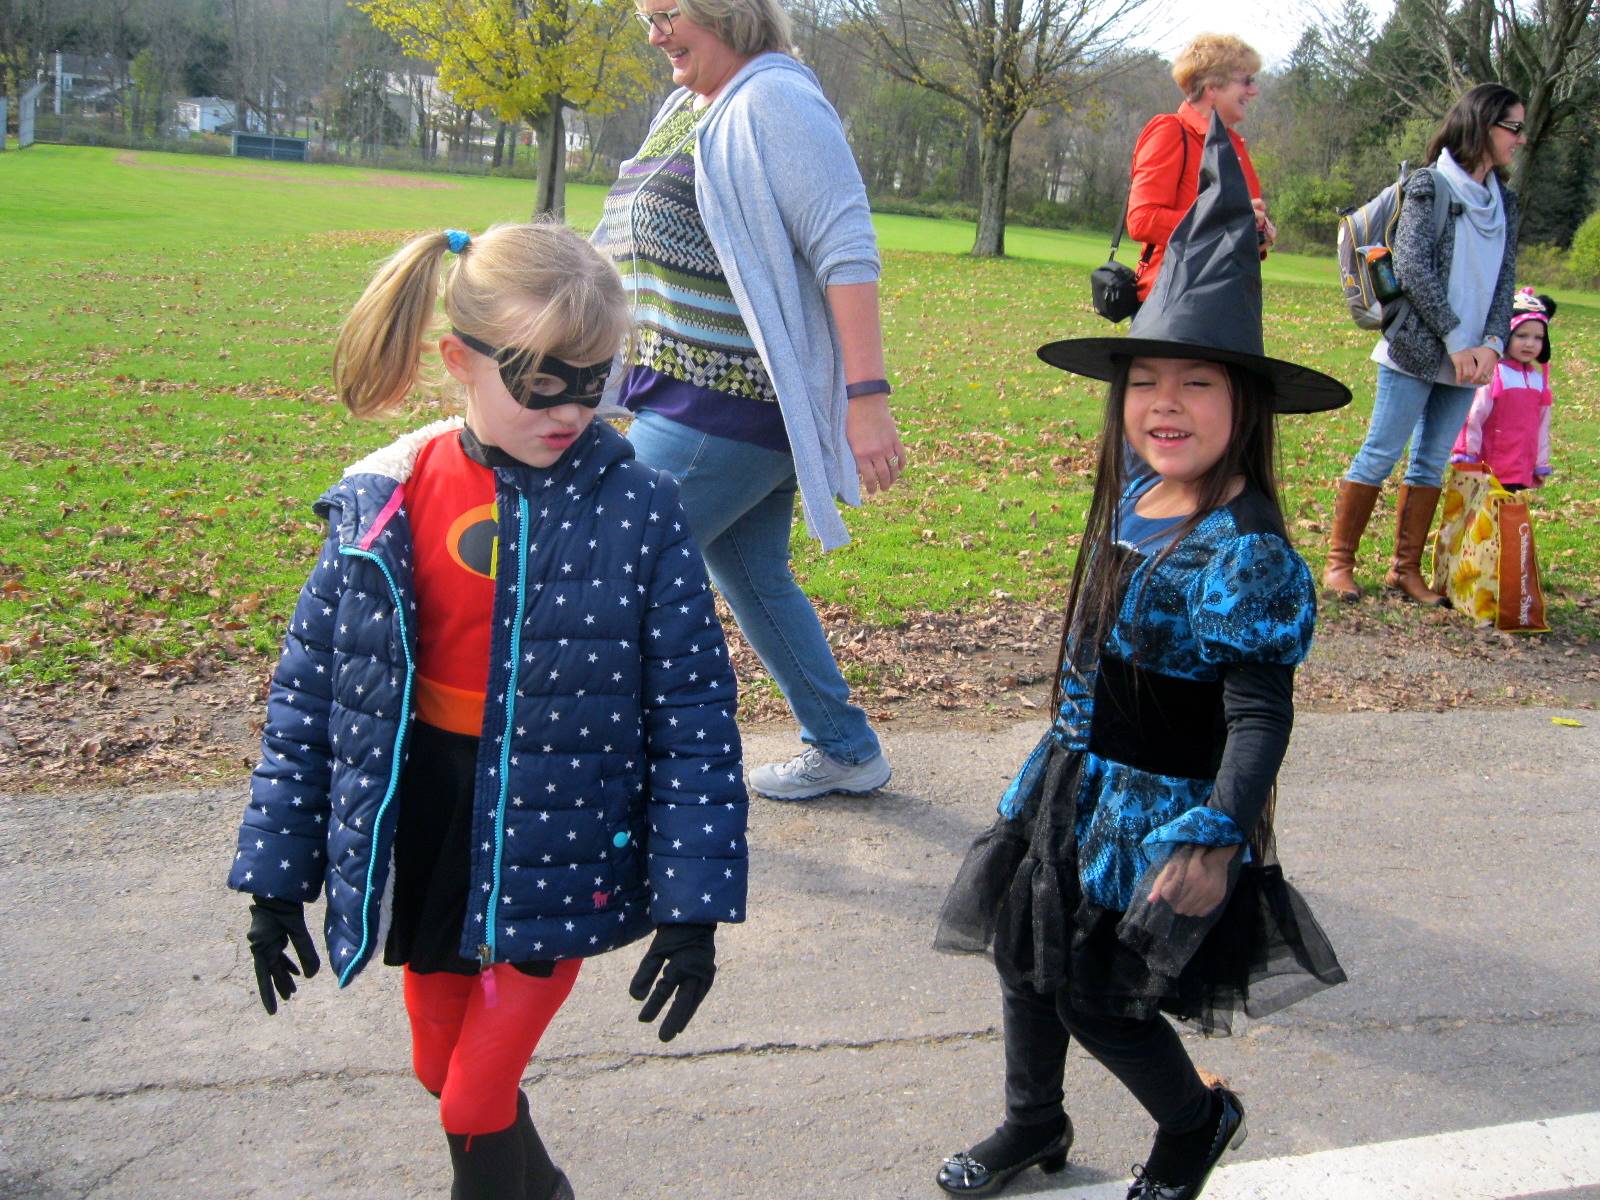 Students in the fall parade at Guilford elementary school.